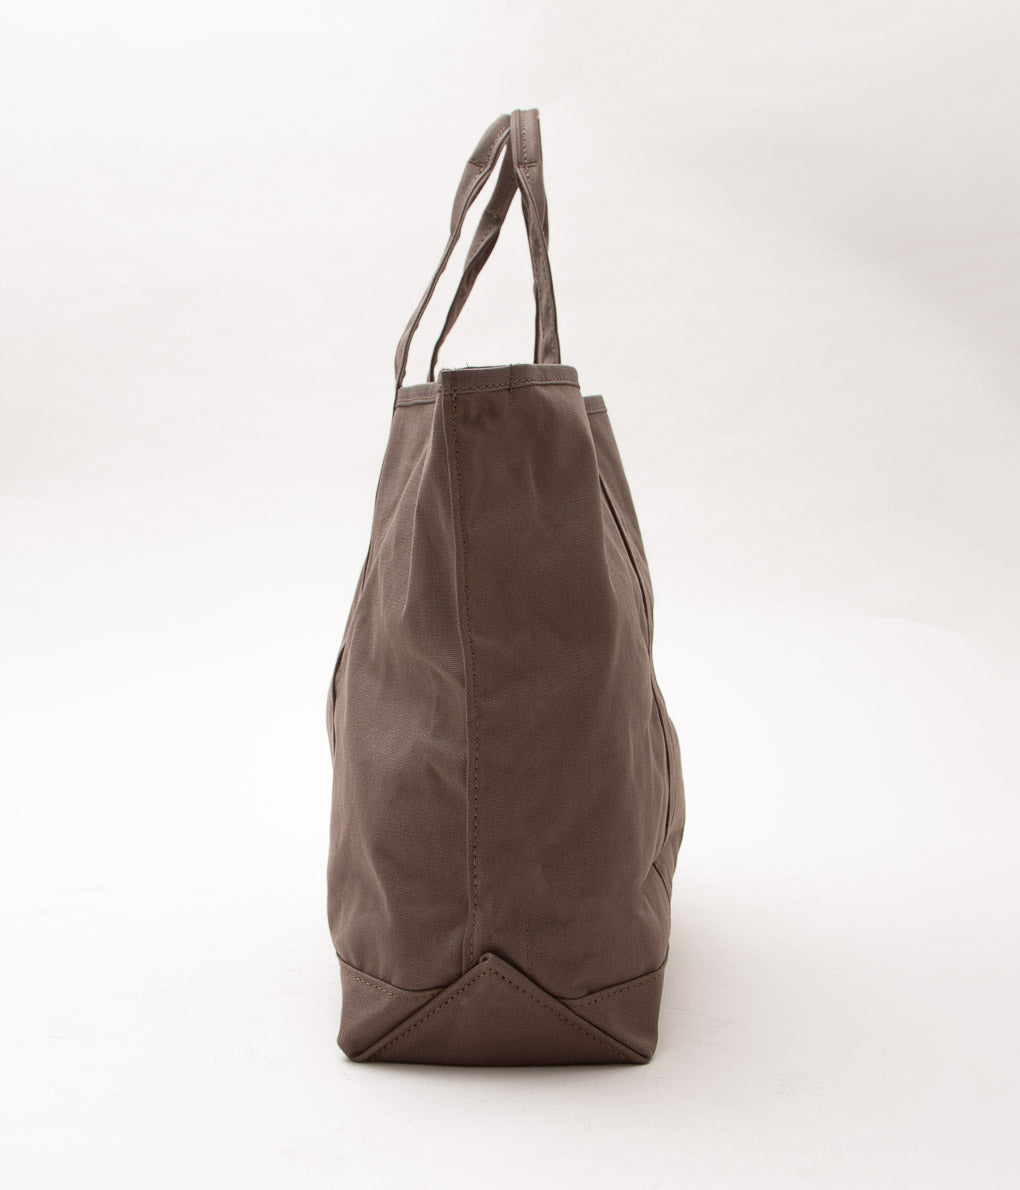 L.L. BEAN "GROCERY TOTE LOGO LARGE"(FOSSIL BROWN)